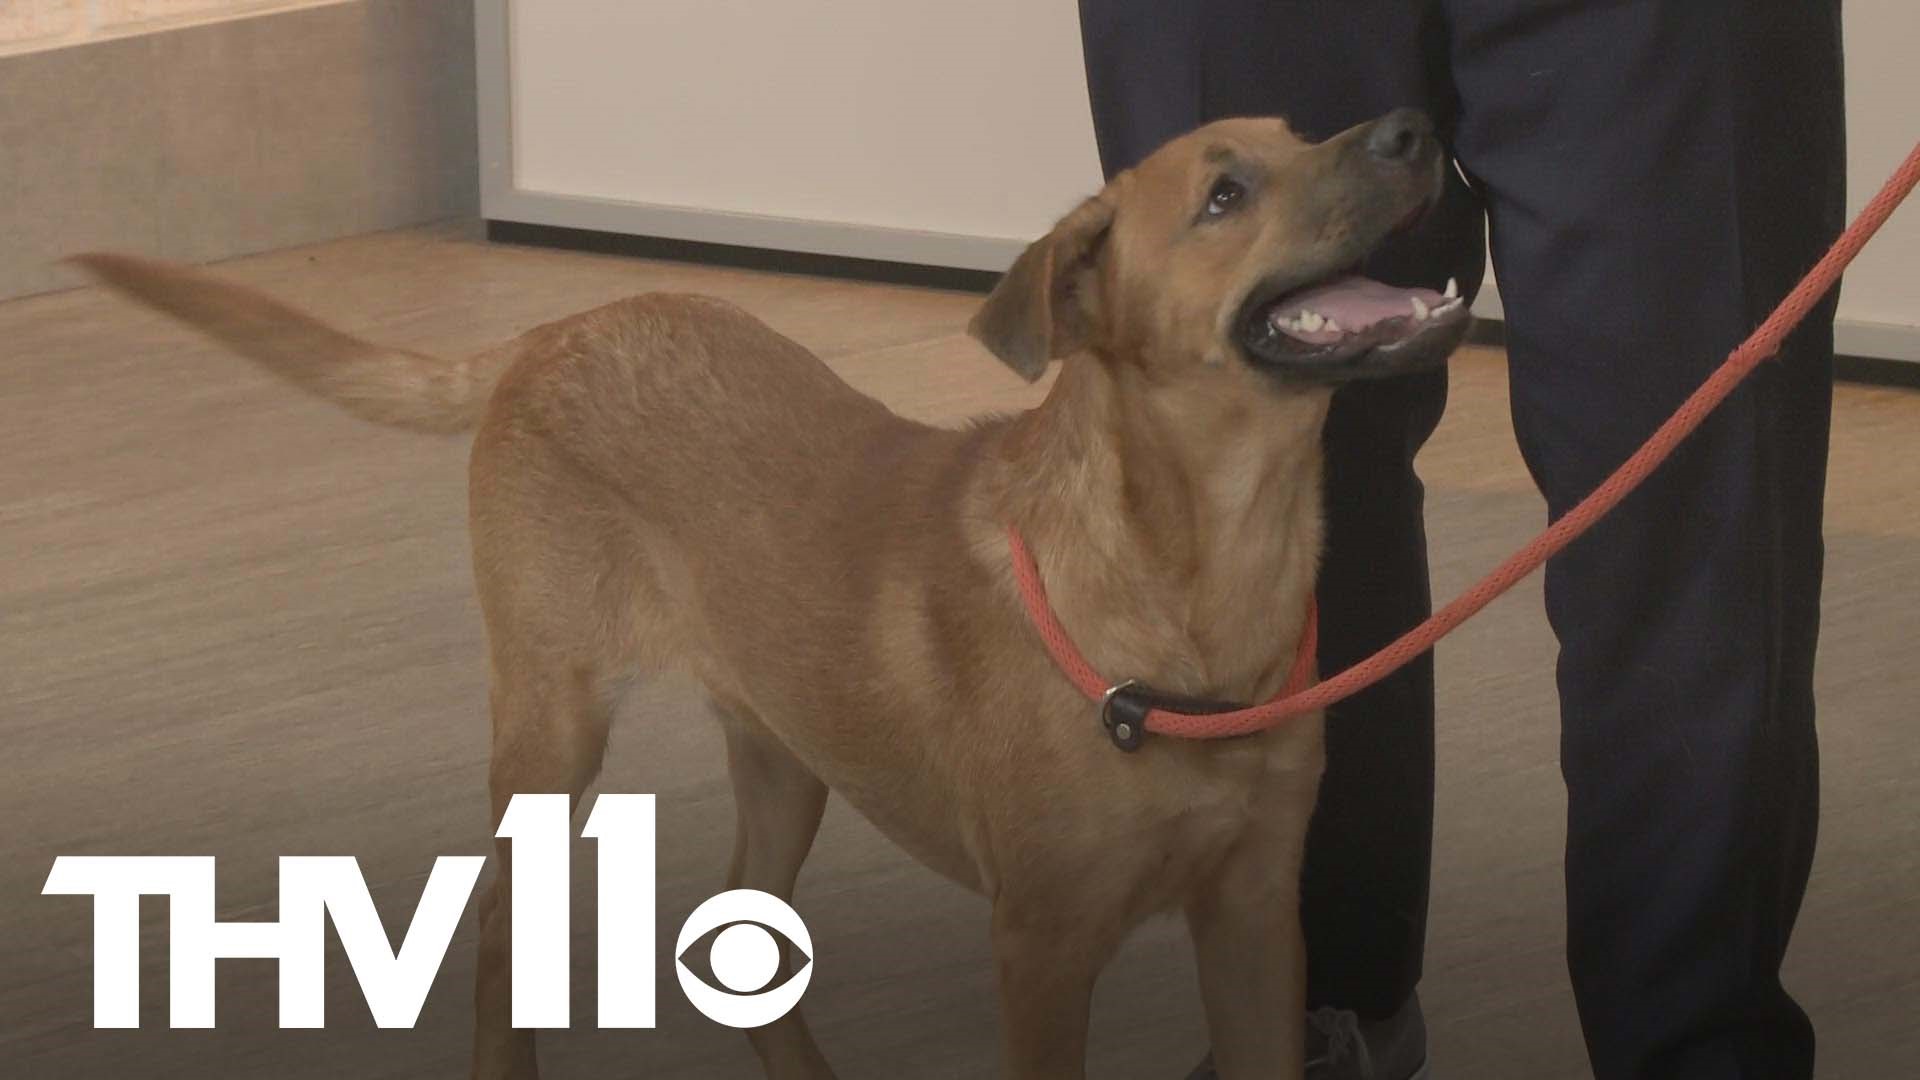 Meet Scout, our Pet of the Week from the Little Rock Animal Village. This playful 9-month-old pup is full of love and ready to be adopted and find his forever home!